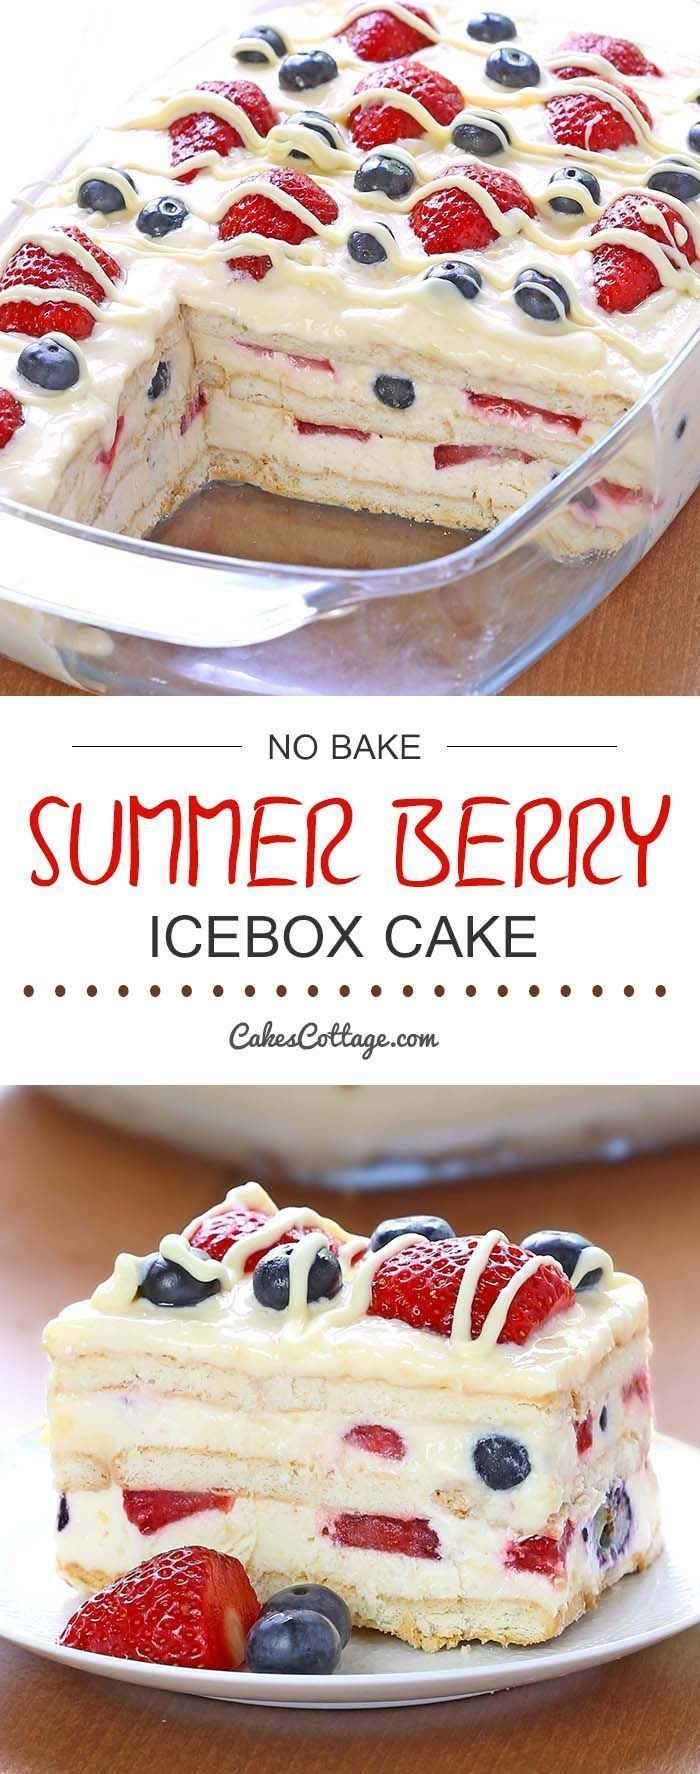 Summer Desserts For Cookouts
 25 best ideas about Summer cookout desserts on Pinterest